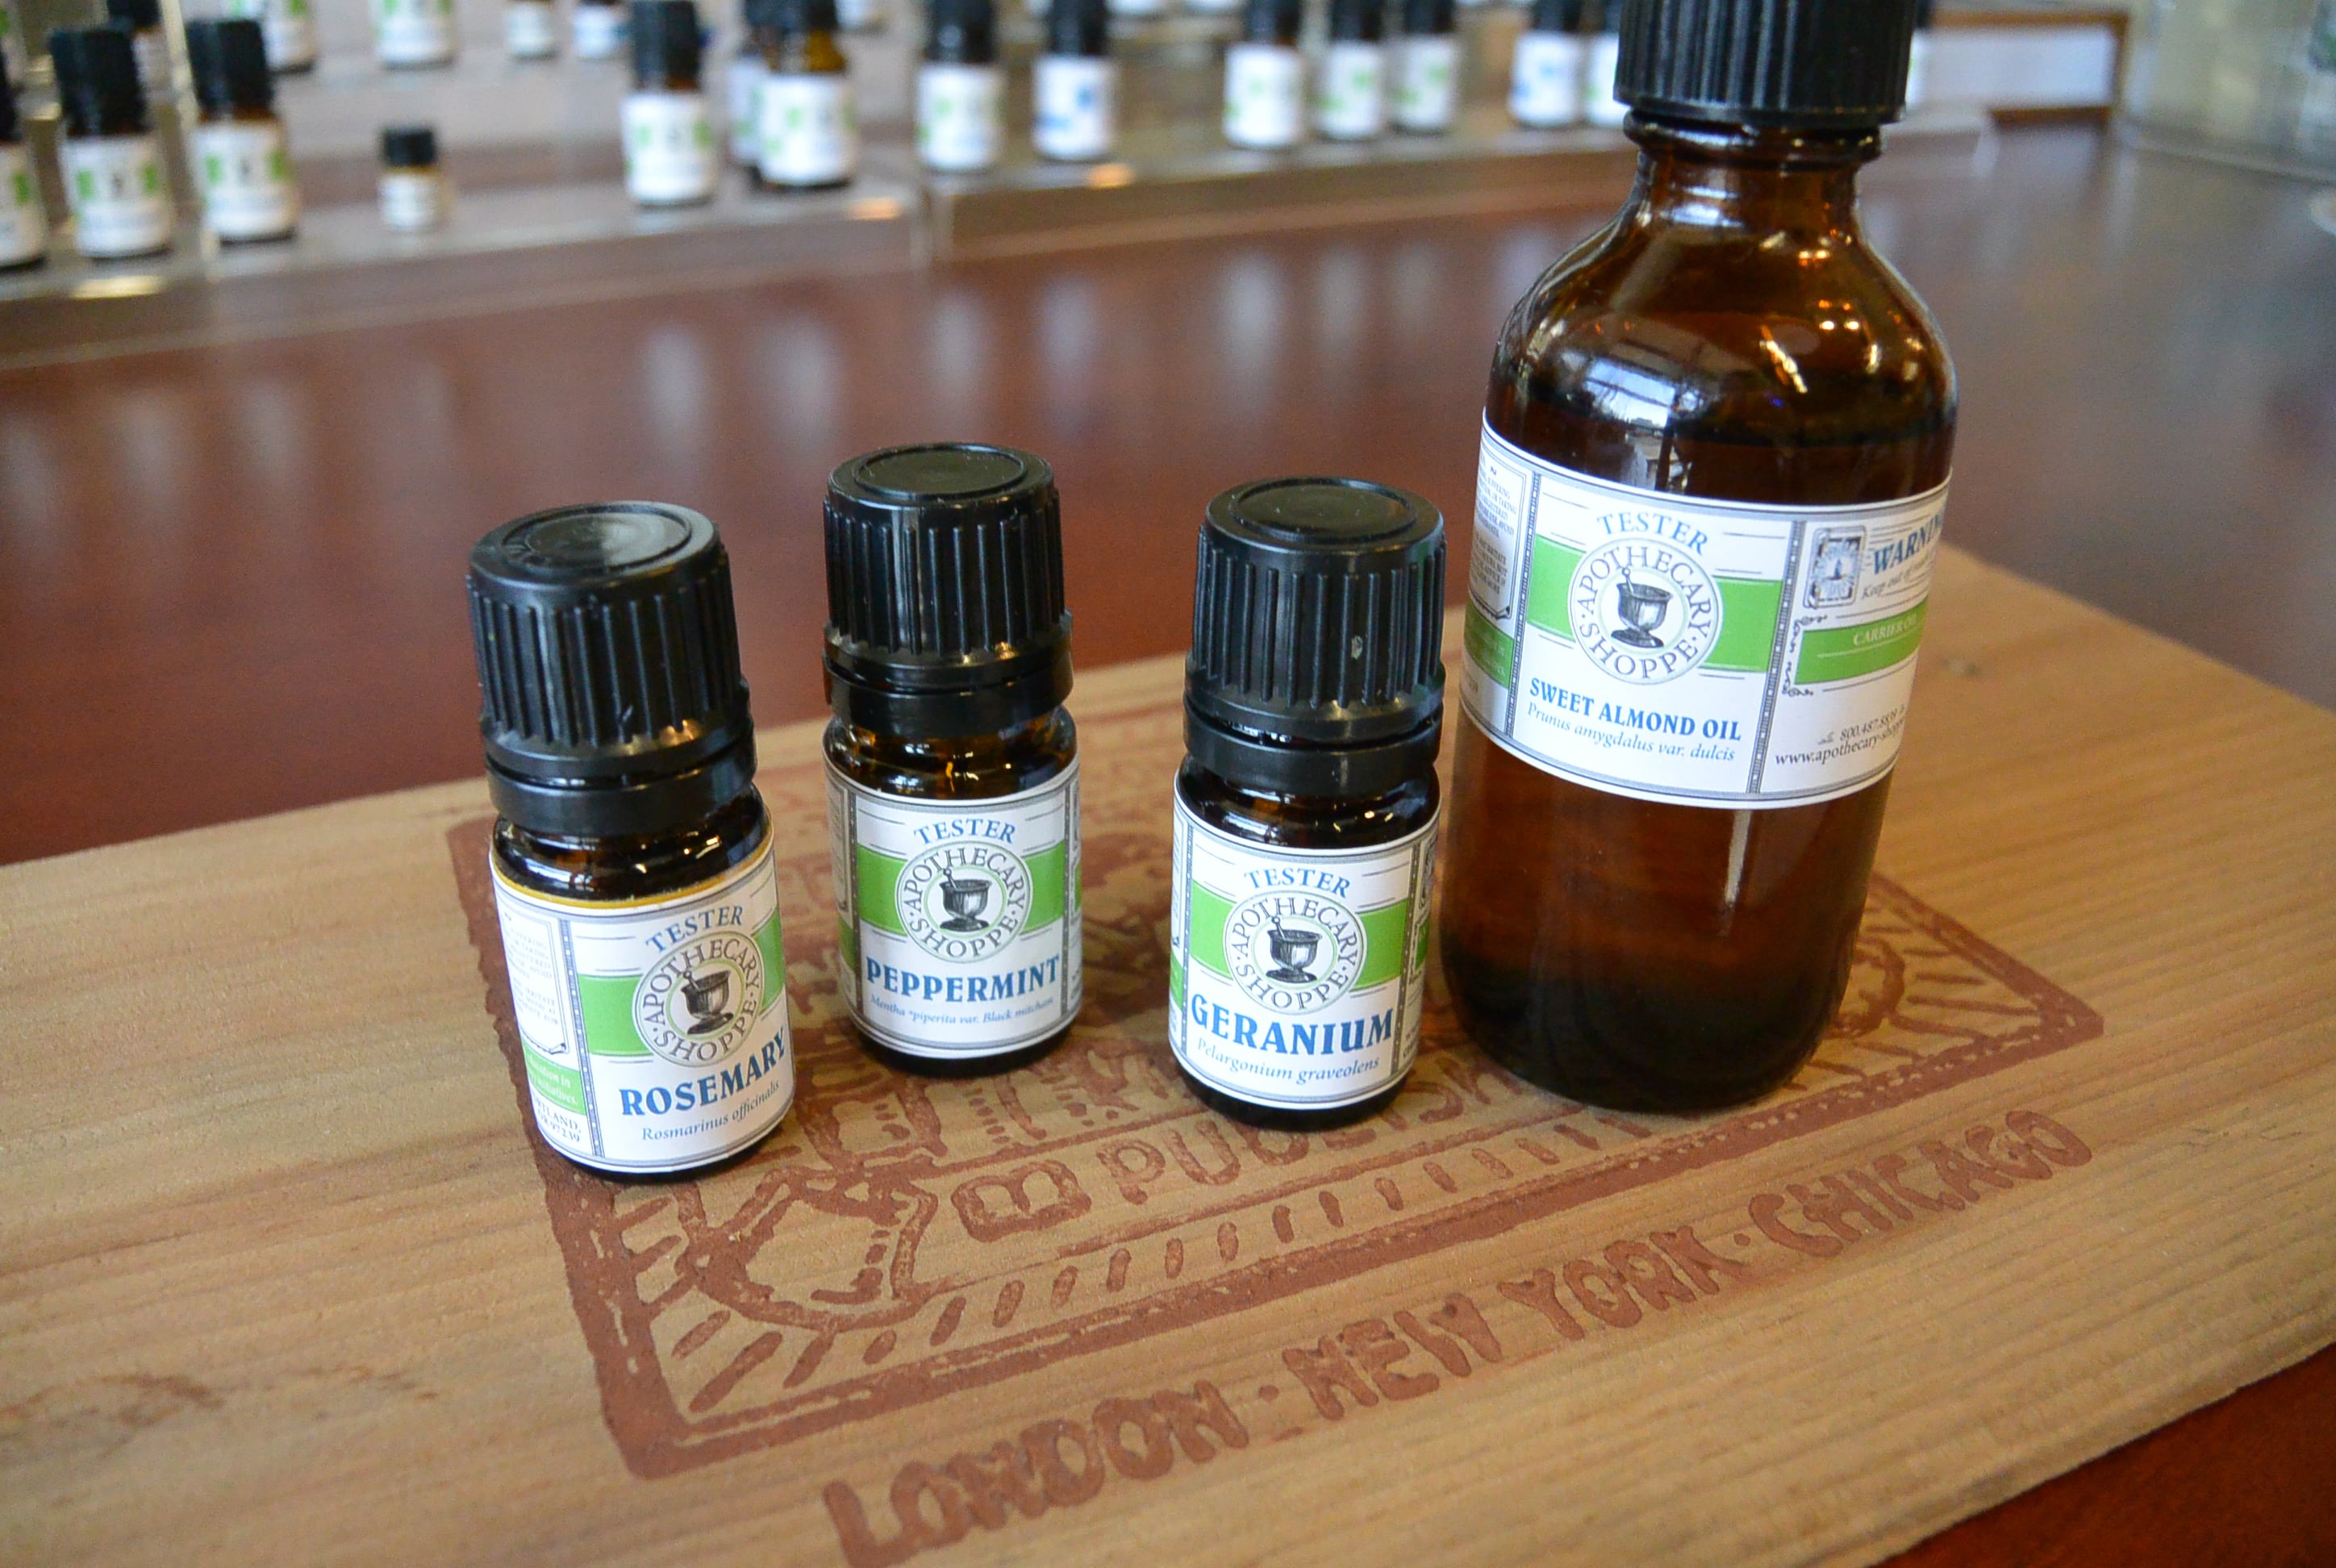 Sweet almond oil with rosemary, geranium and peppermint essential oils